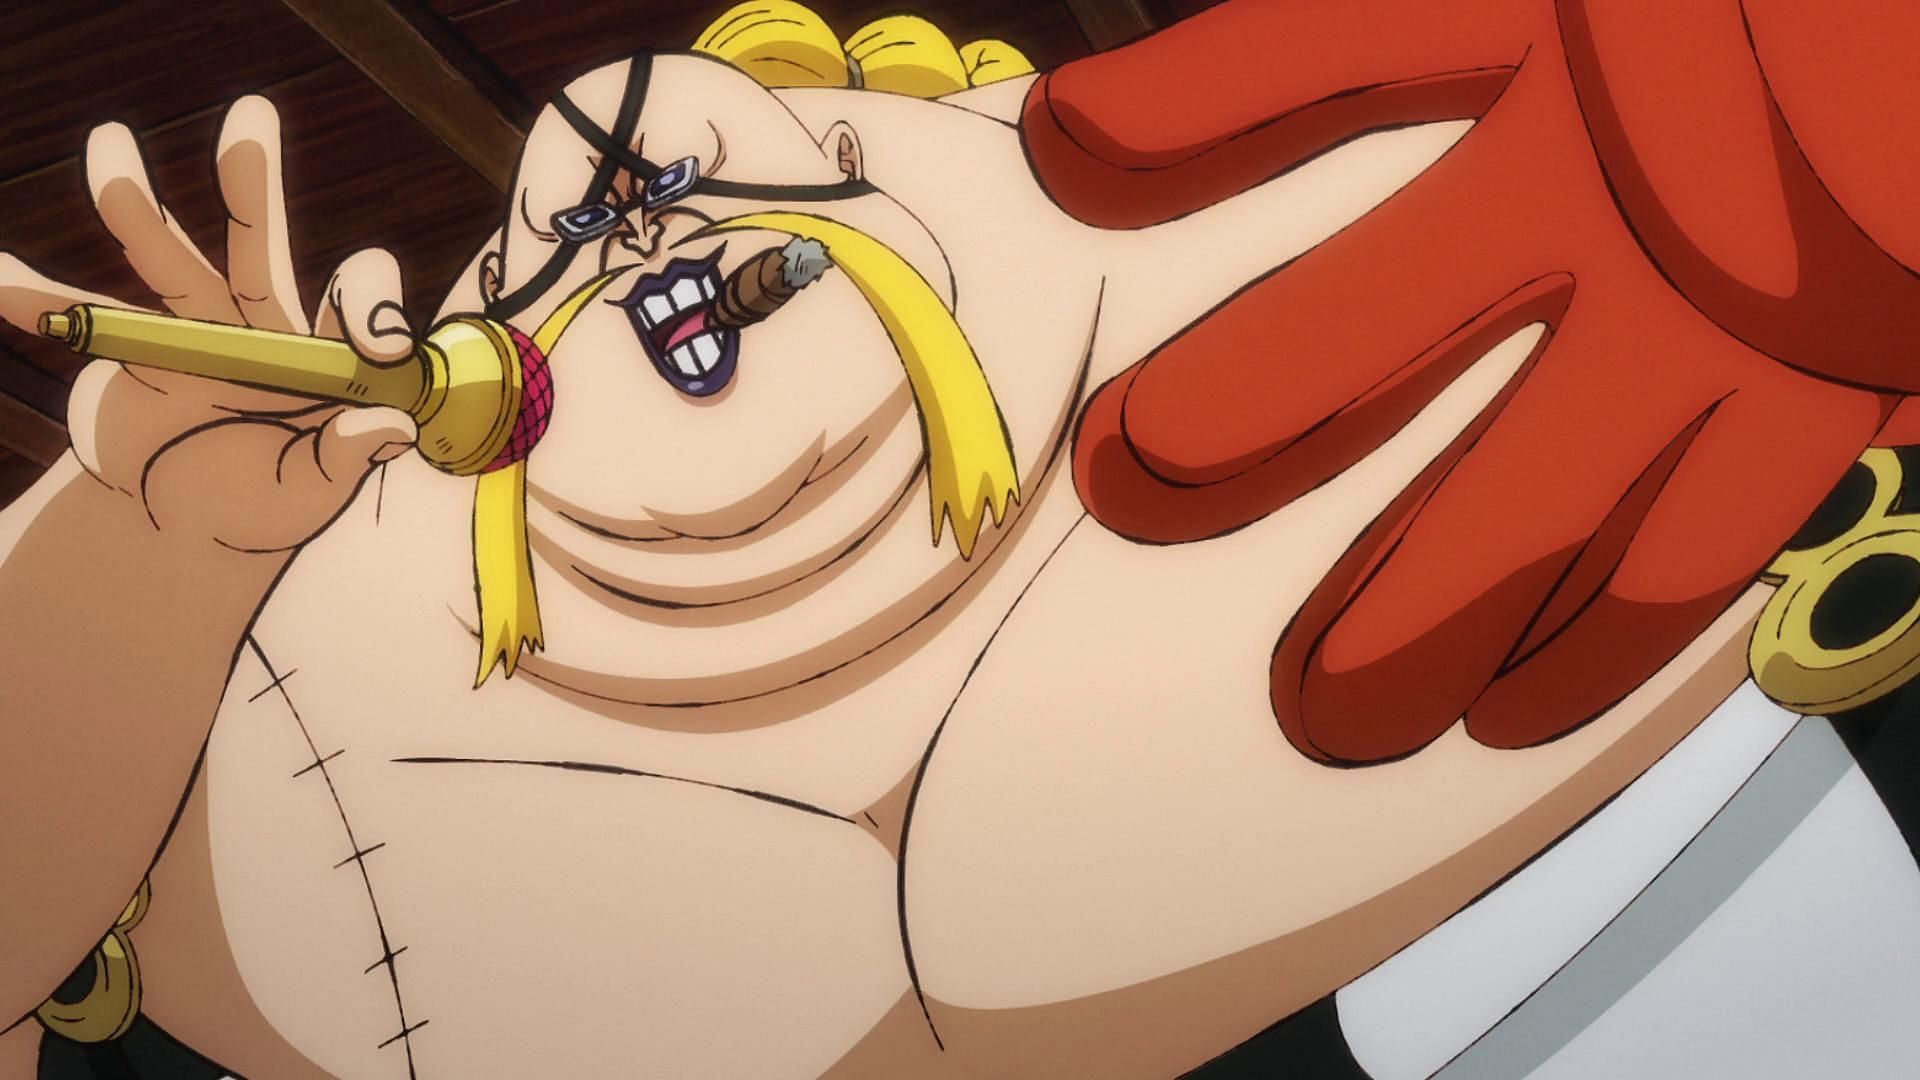 Queen as seen in One Piece (Image via Toei Animation, One Piece)